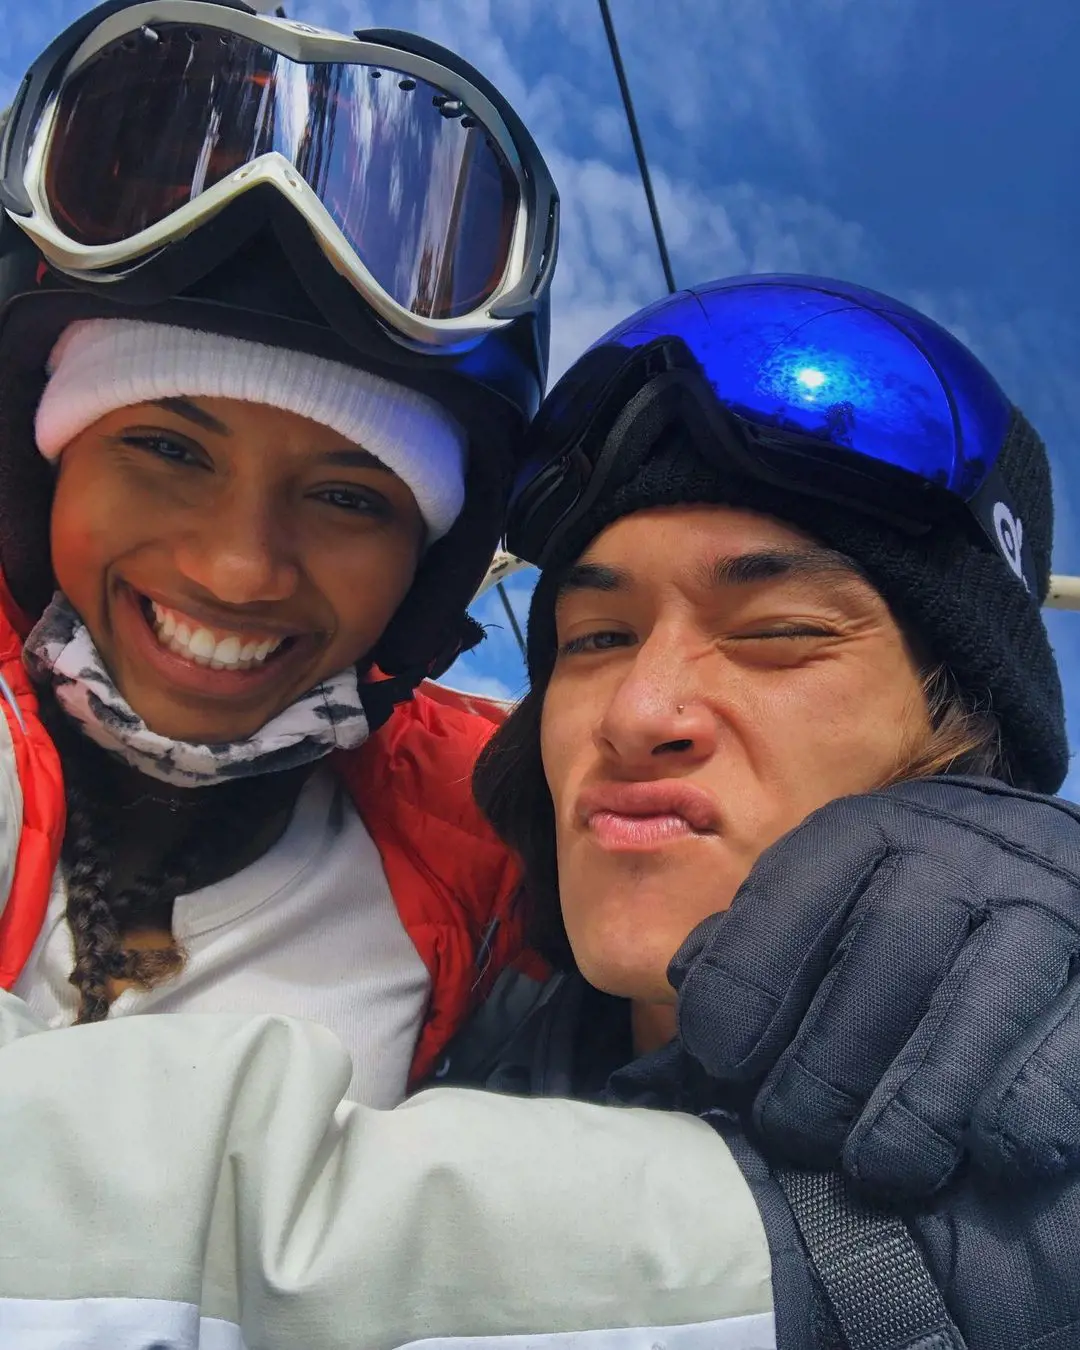 Quincy's ex girlfriend Jireh shared a picture with her new boyfriend while they were snowboarding in 2021